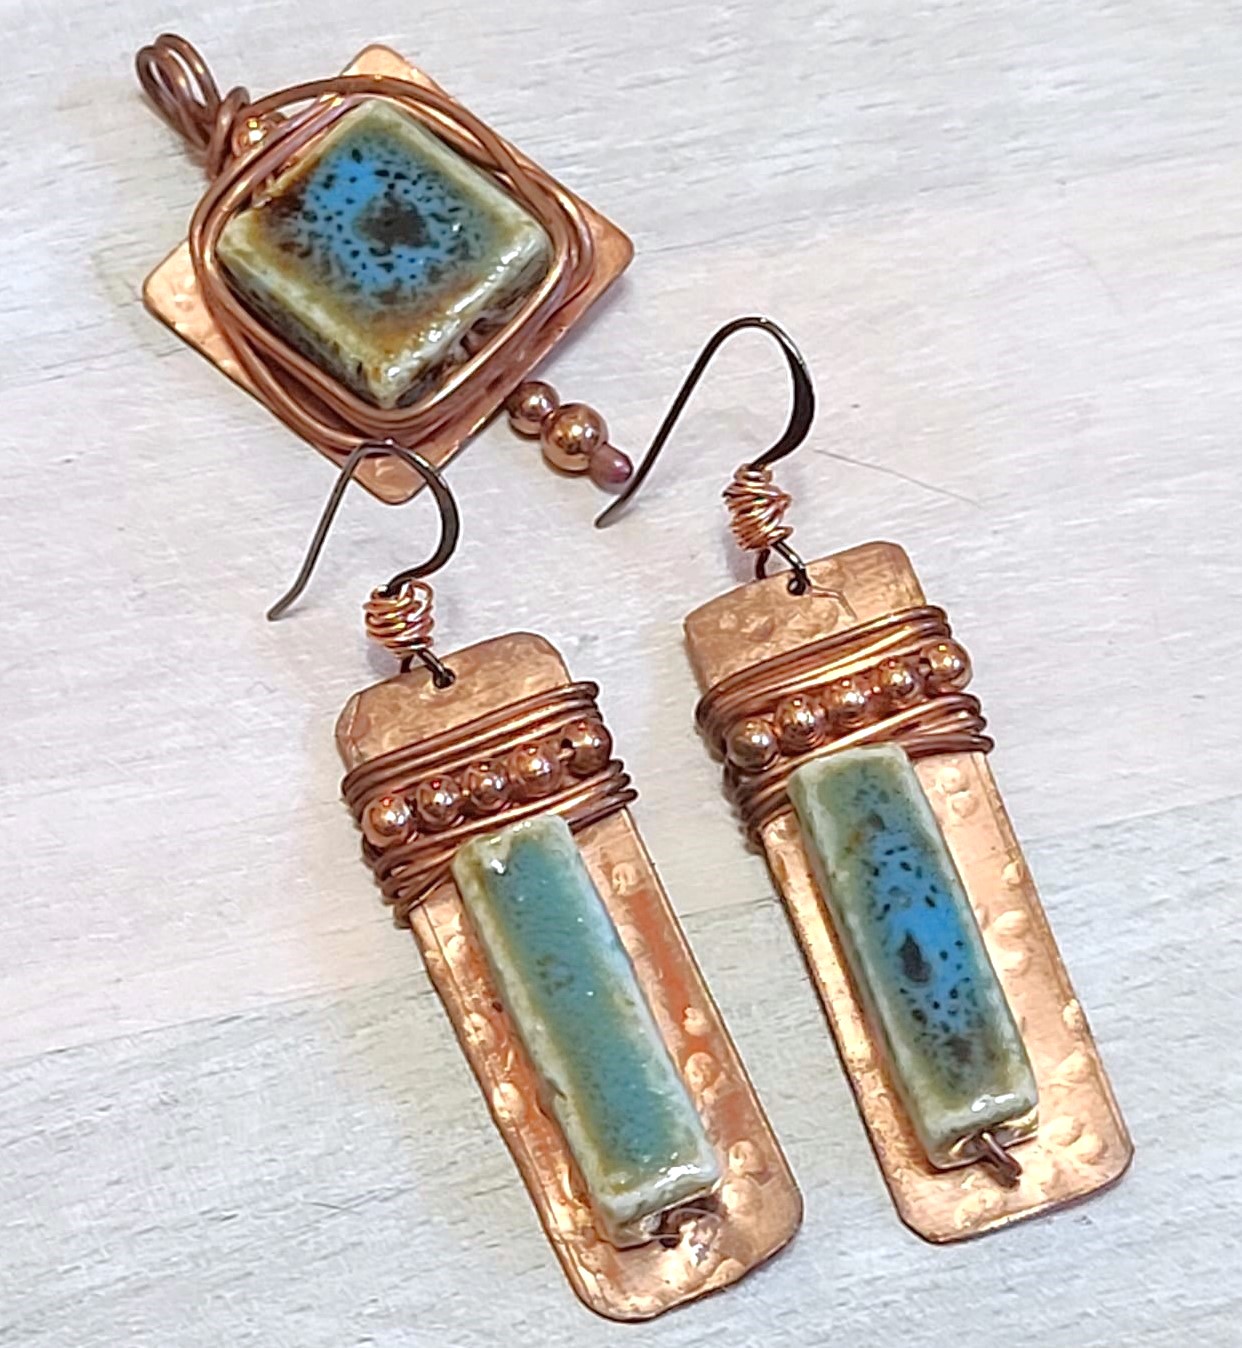 Copper and ceramic pendant and earrings set, handcrafted, wire wrapped